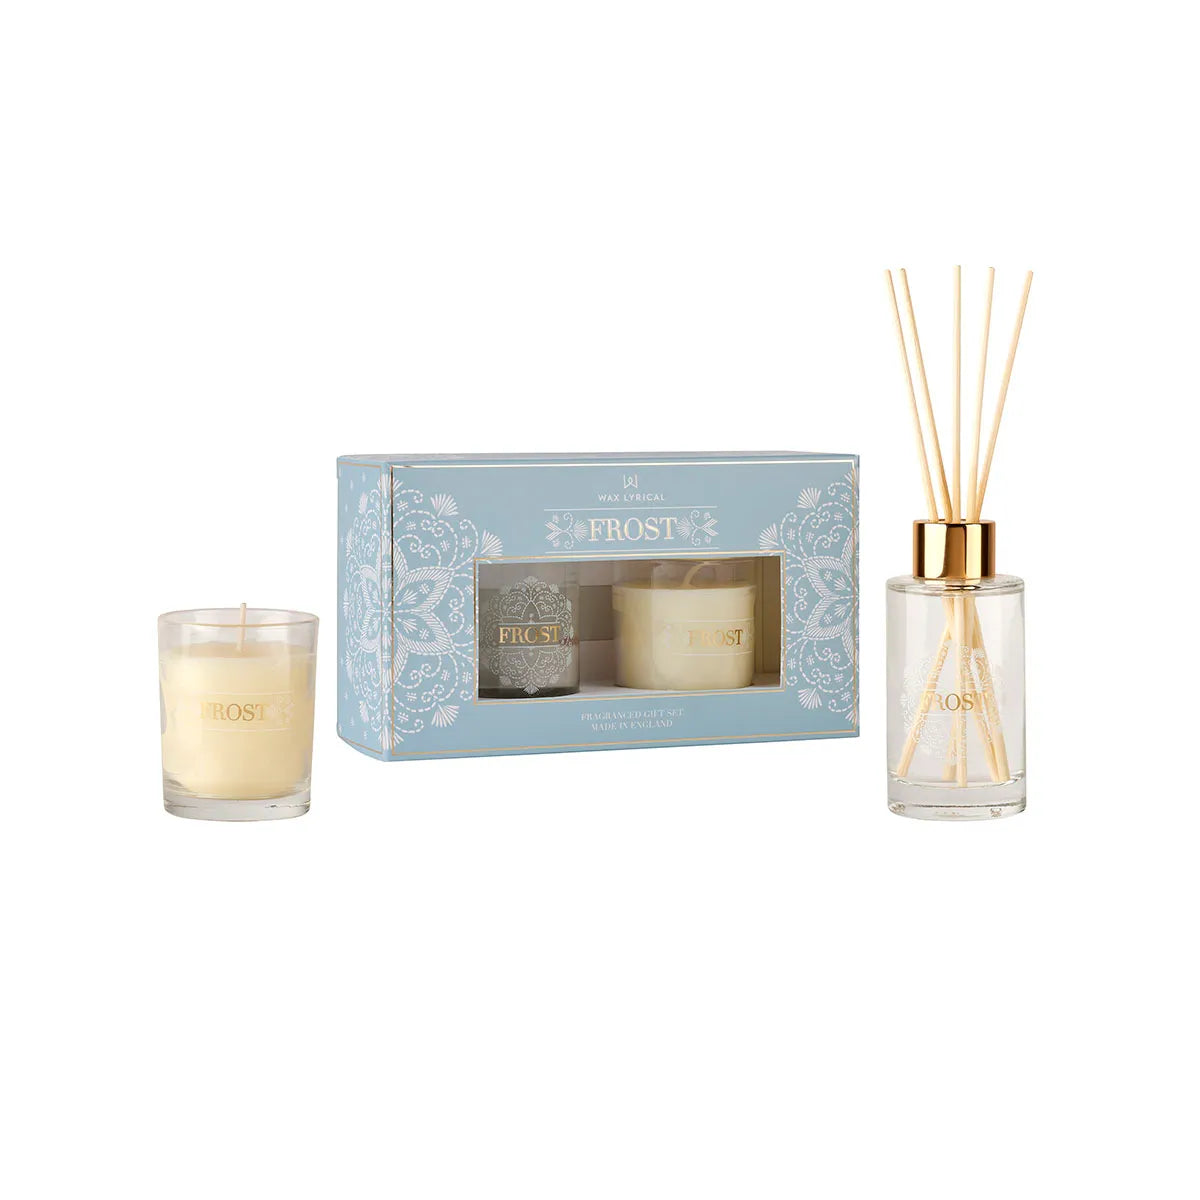 Frost Candle and Diffuser Gift Set